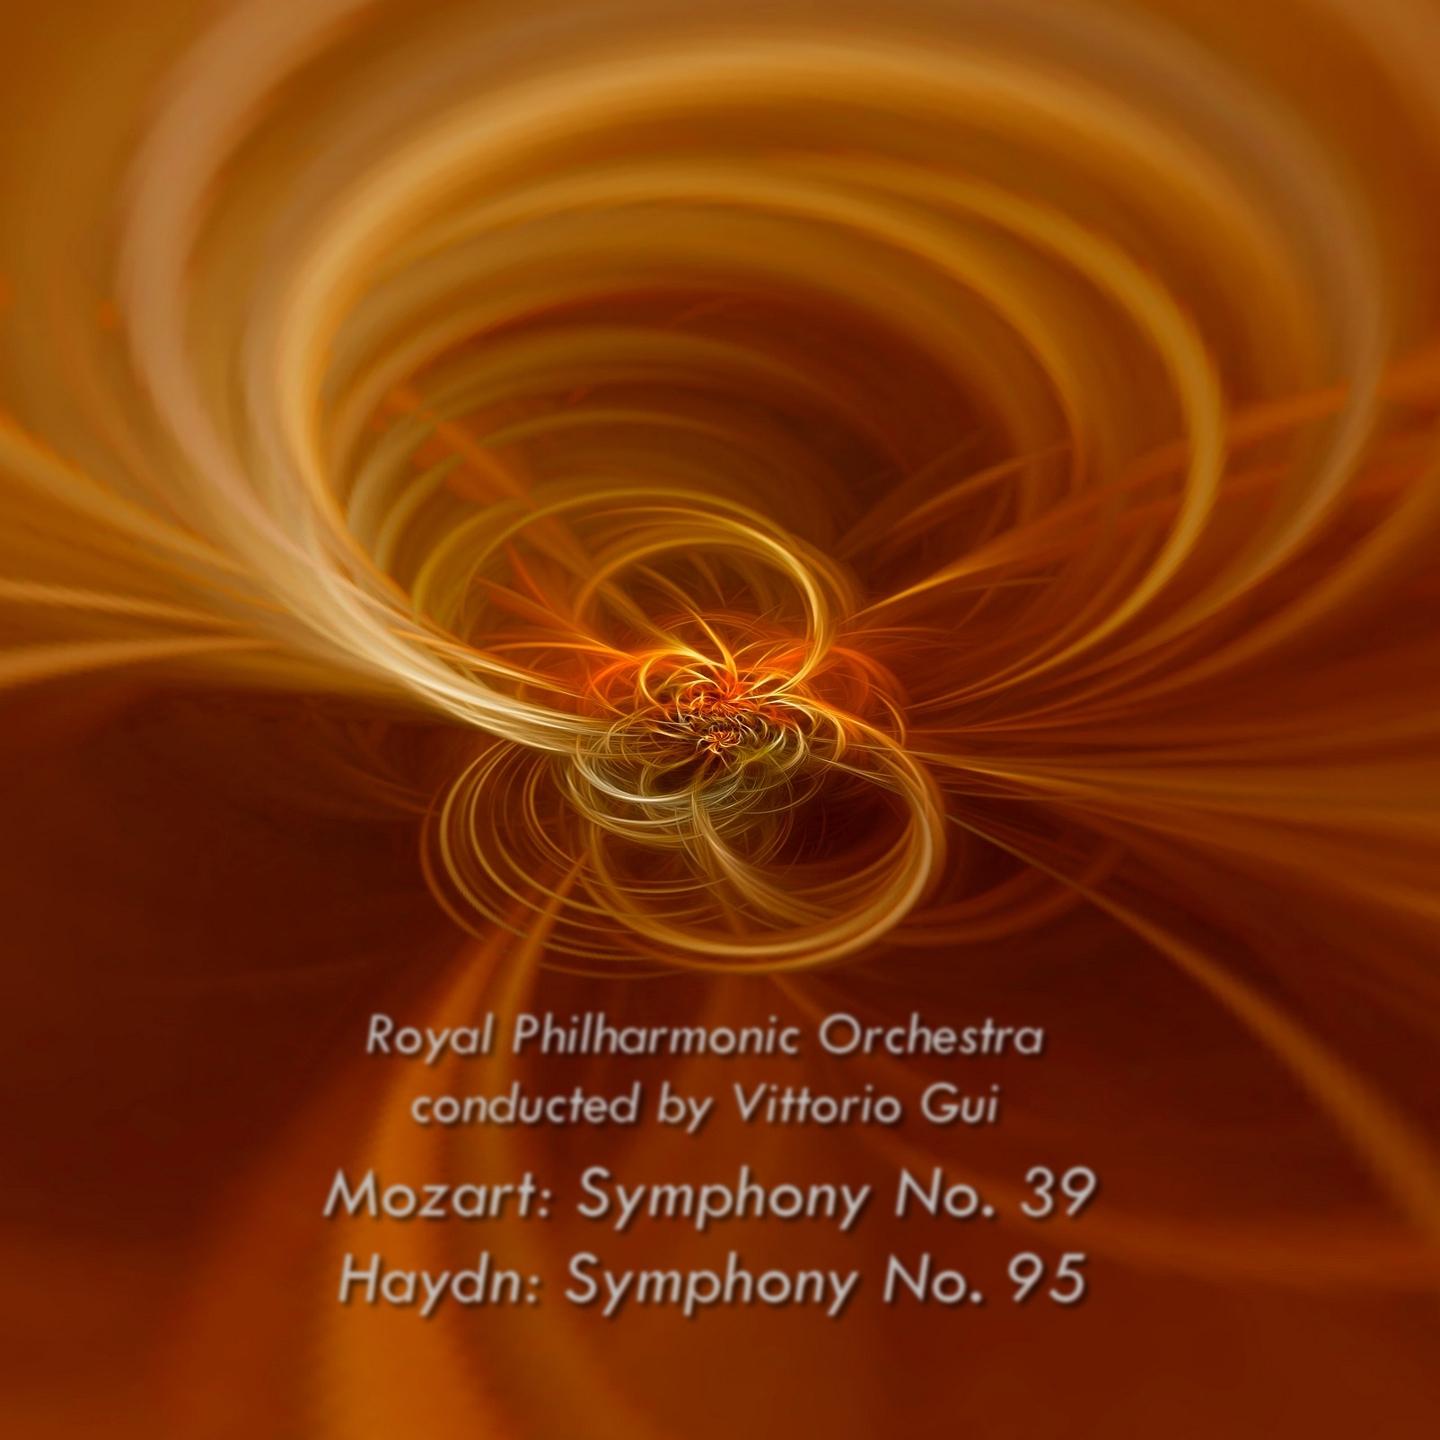 Symphony No 95 in C Minor, Op. 3rd mvt. - Minuet and Trio